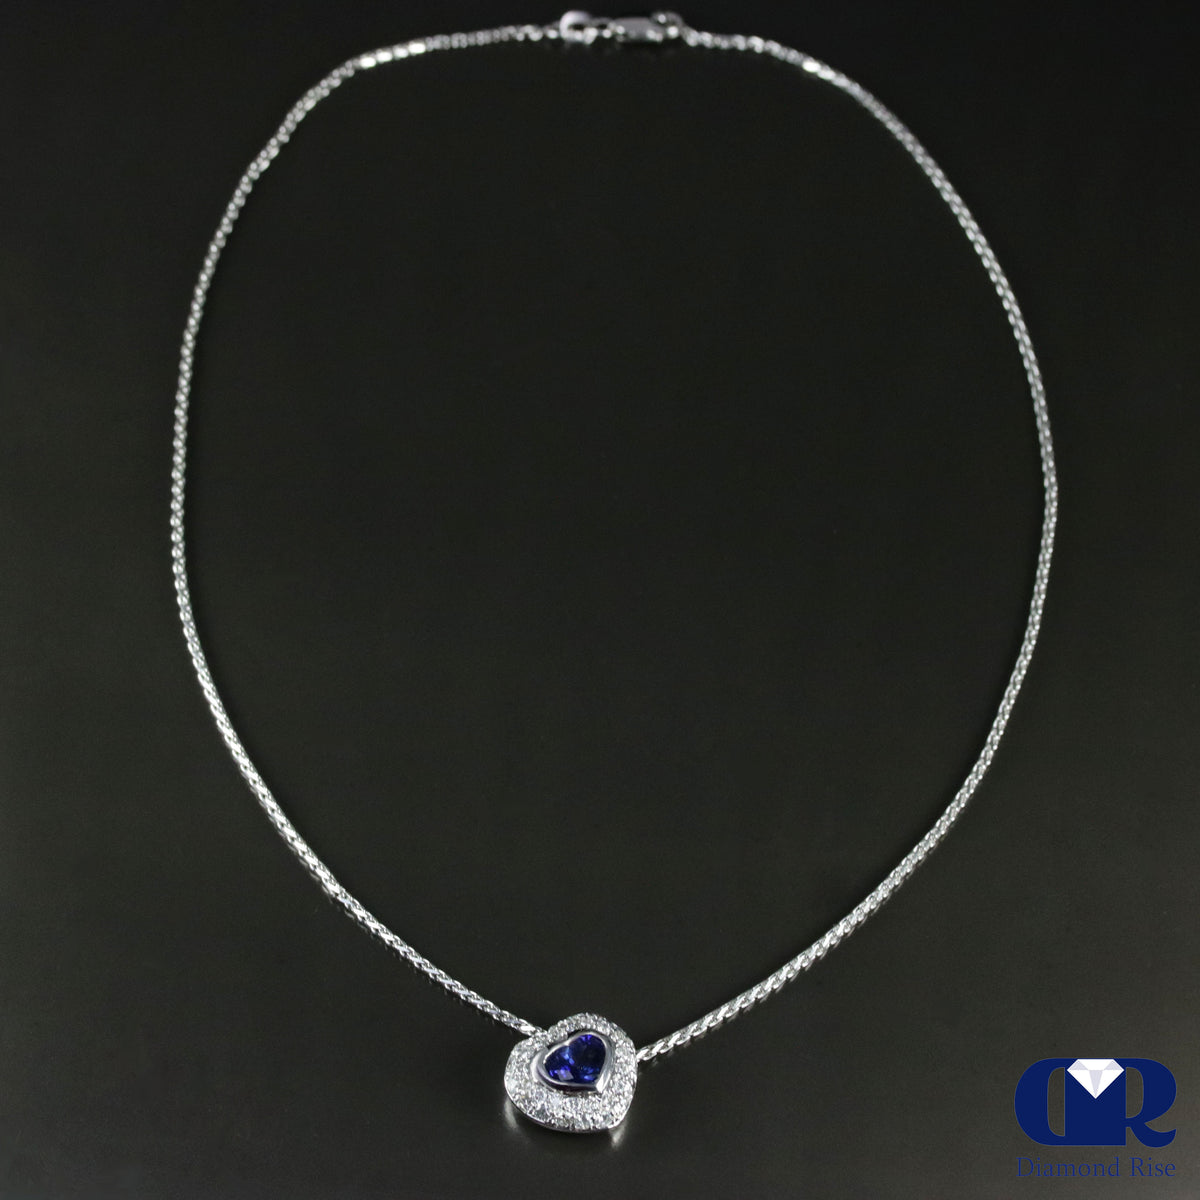 Heart Shaped Sapphire & Diamond Pendant Necklace In 14K White Gold